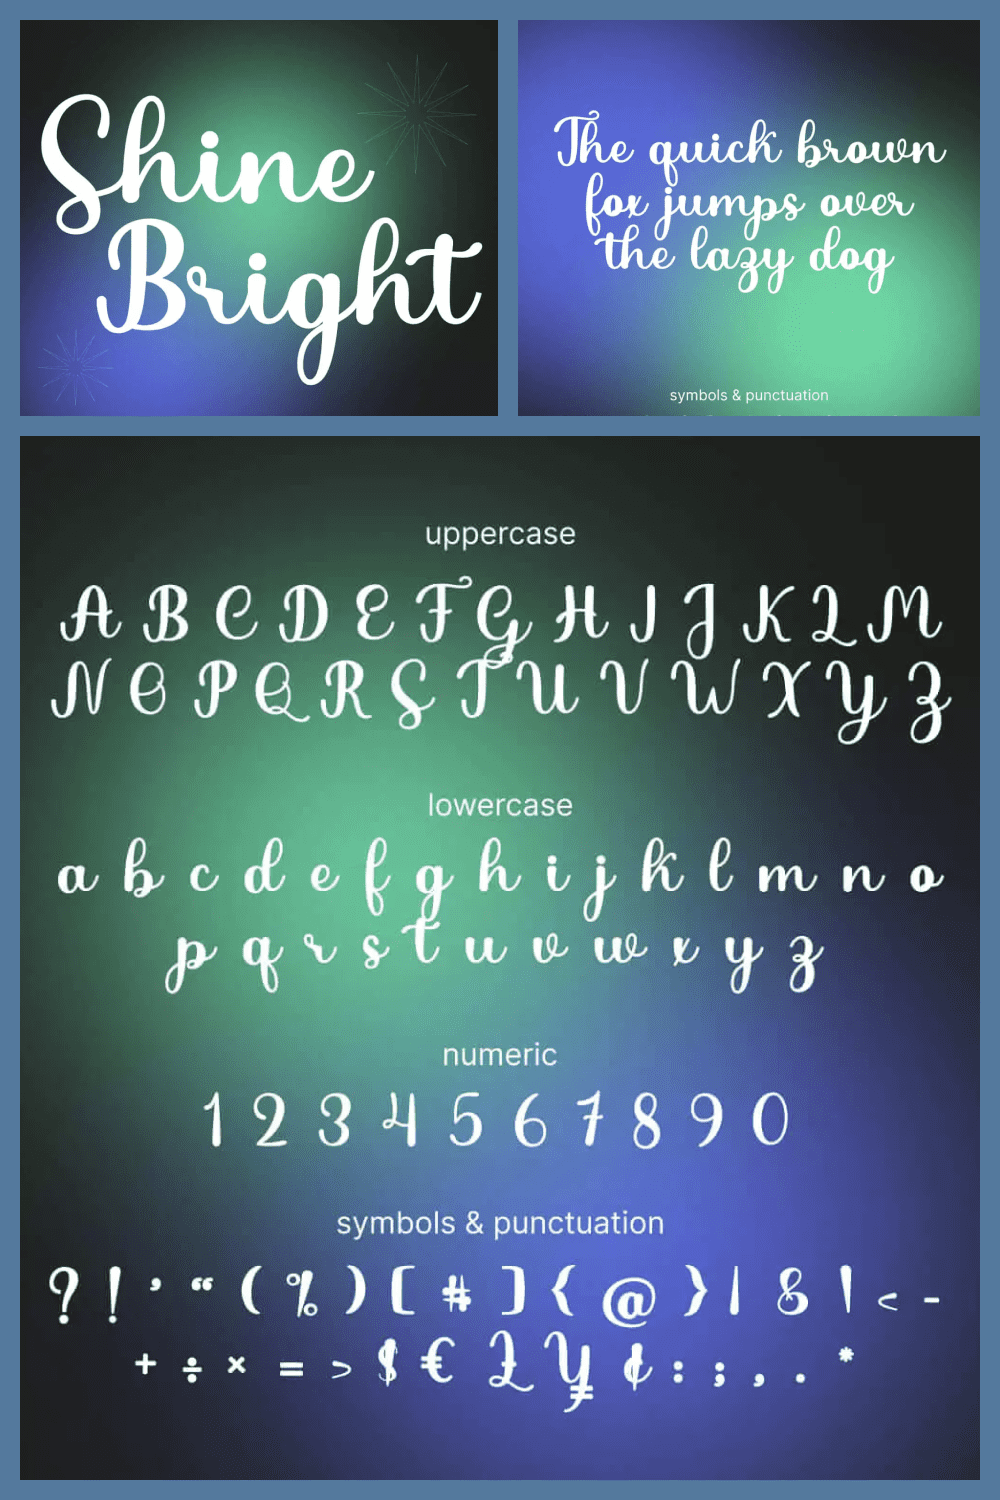 Alphabet and numbers in white on a blue-green background.